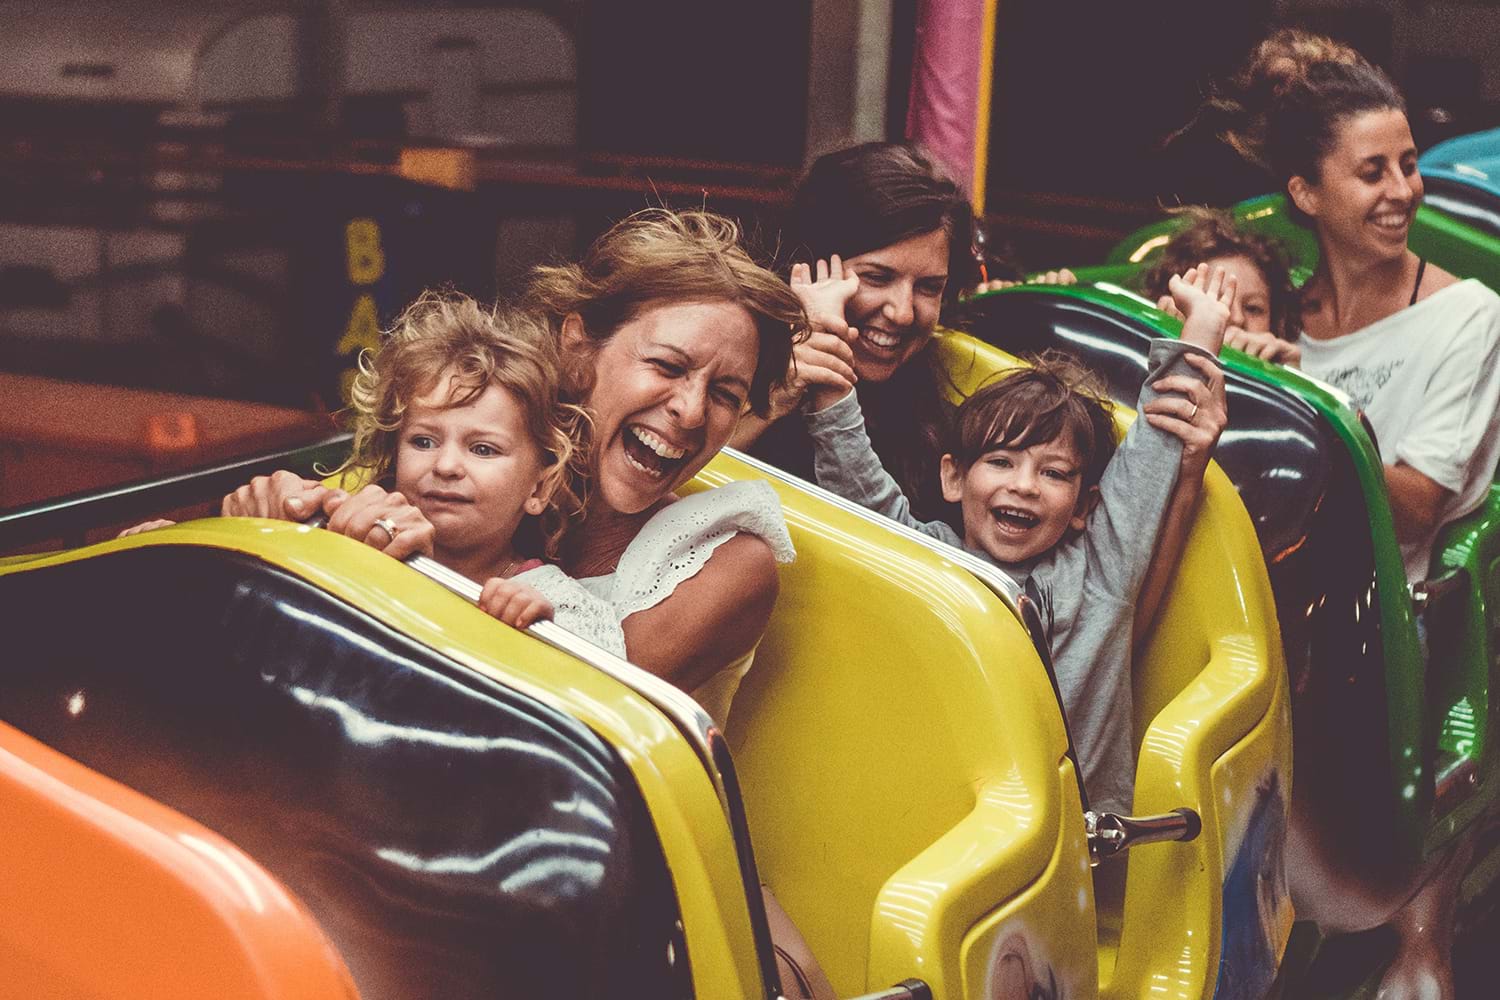 Parents and children on rollercoaster